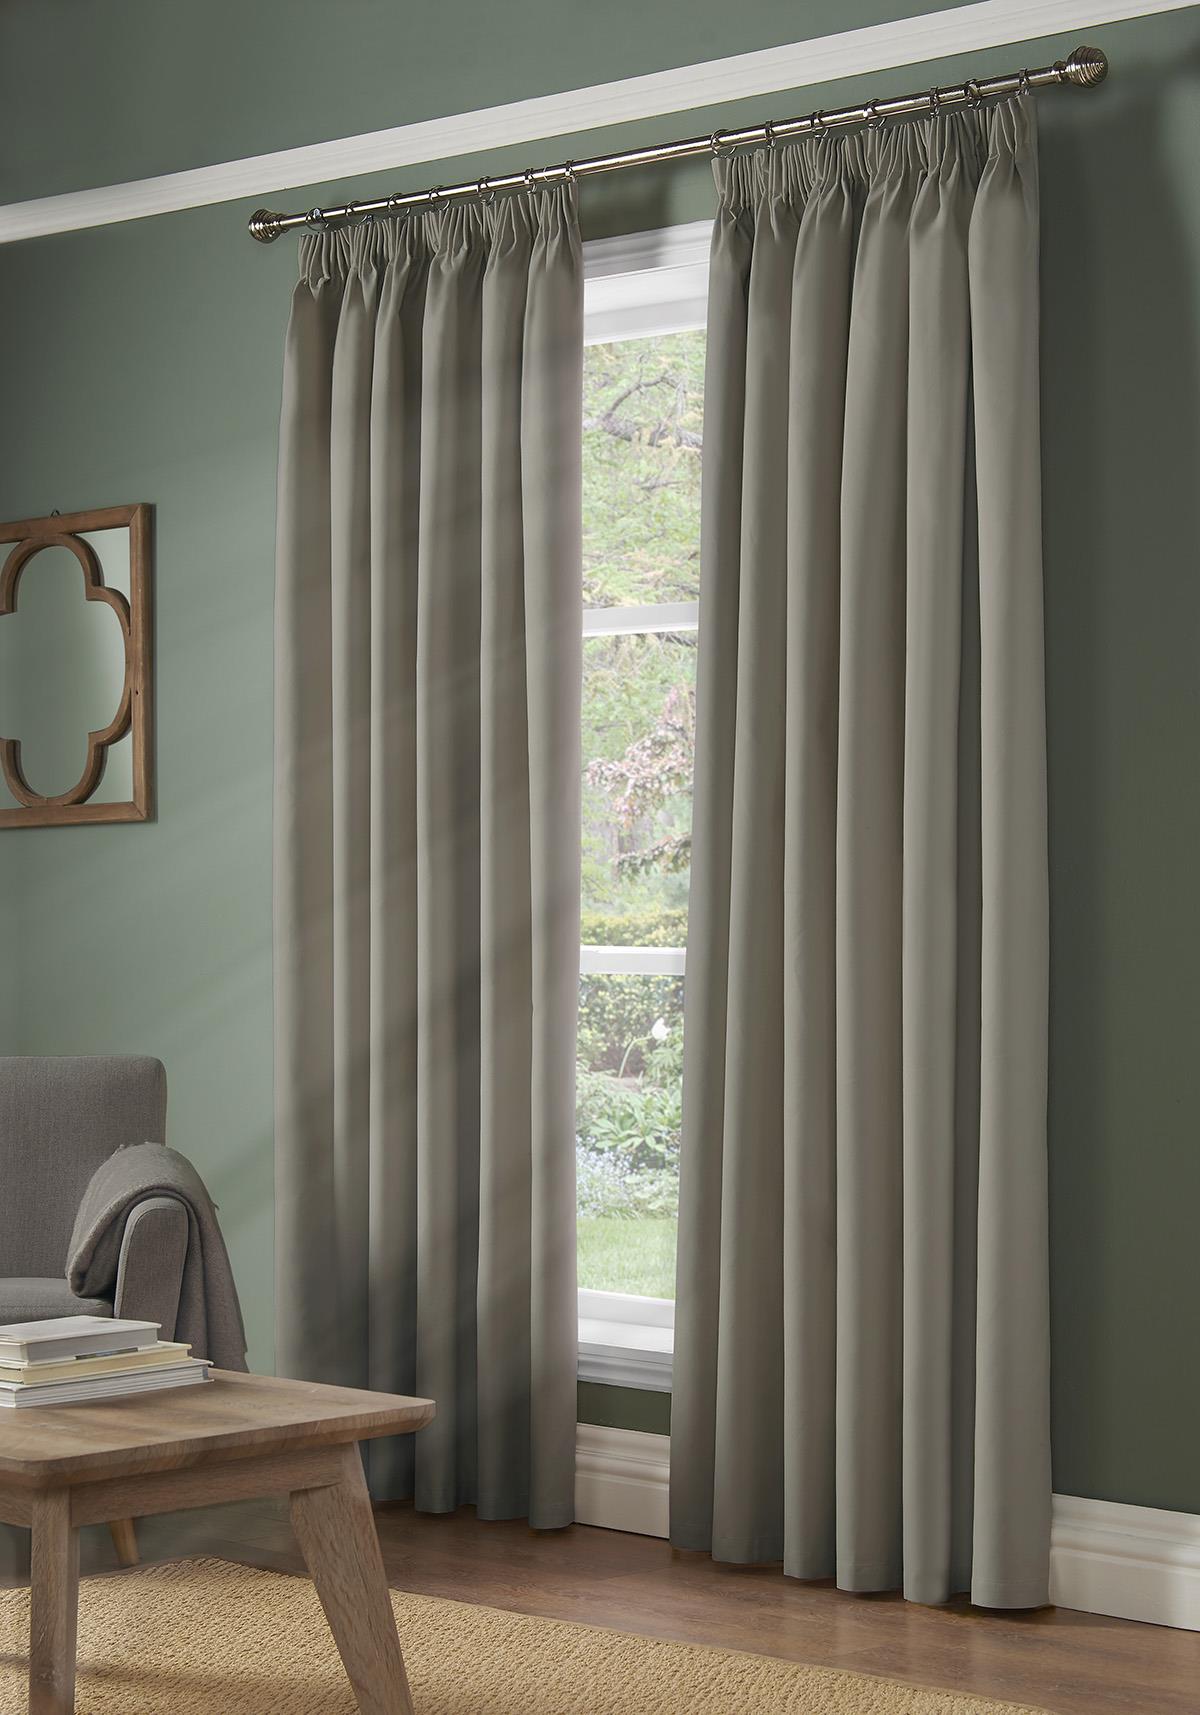 Silver Blackout Thermal Taped Curtains - Pair